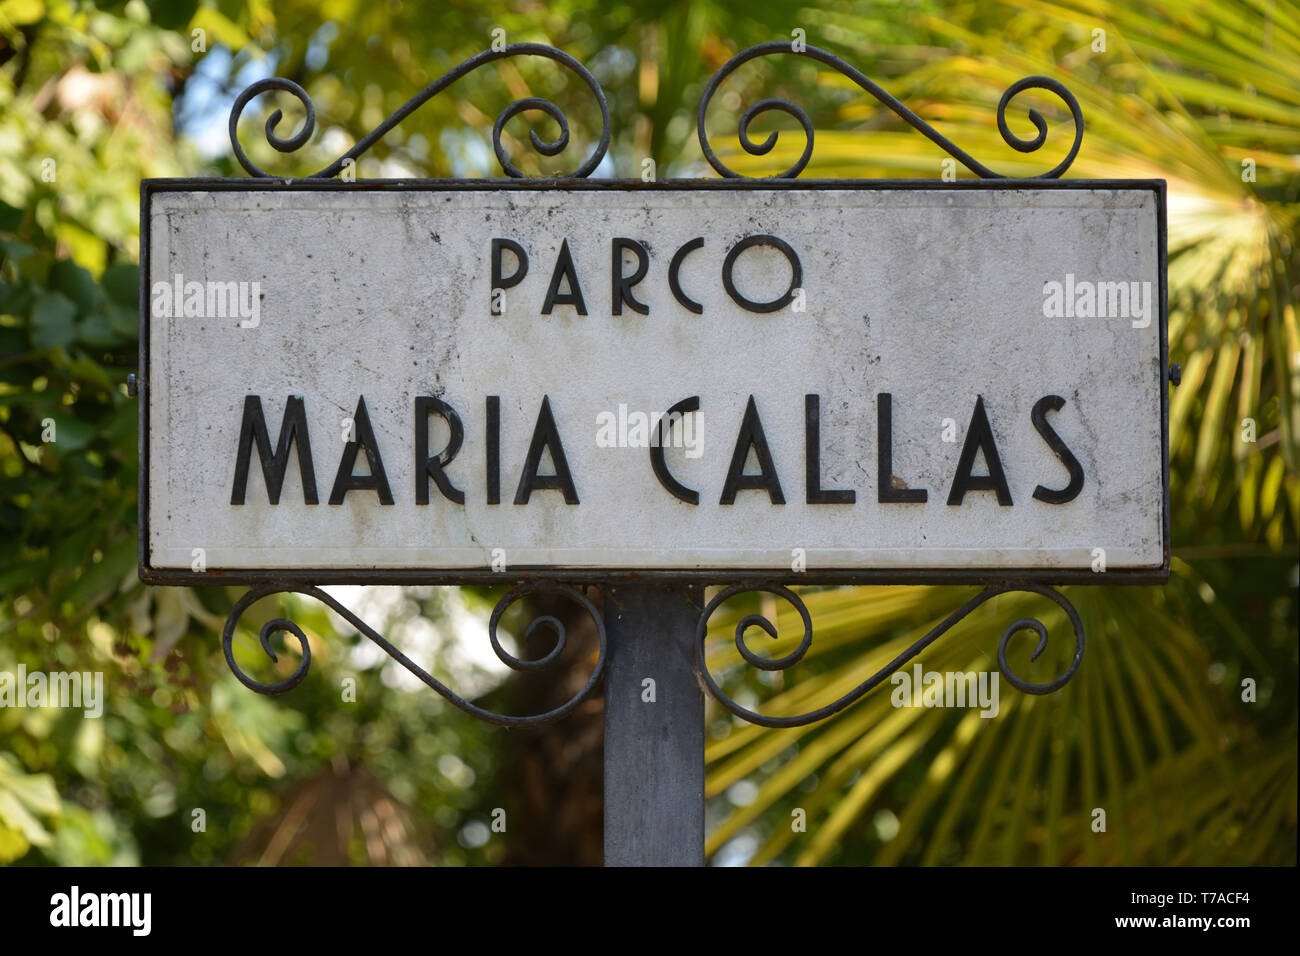 Sirmione, Lombardy, Italy - September 04, 2018: Place sign of the Parco Maria Callas in Sirmione on the Lake Garda - Italy. Stock Photo